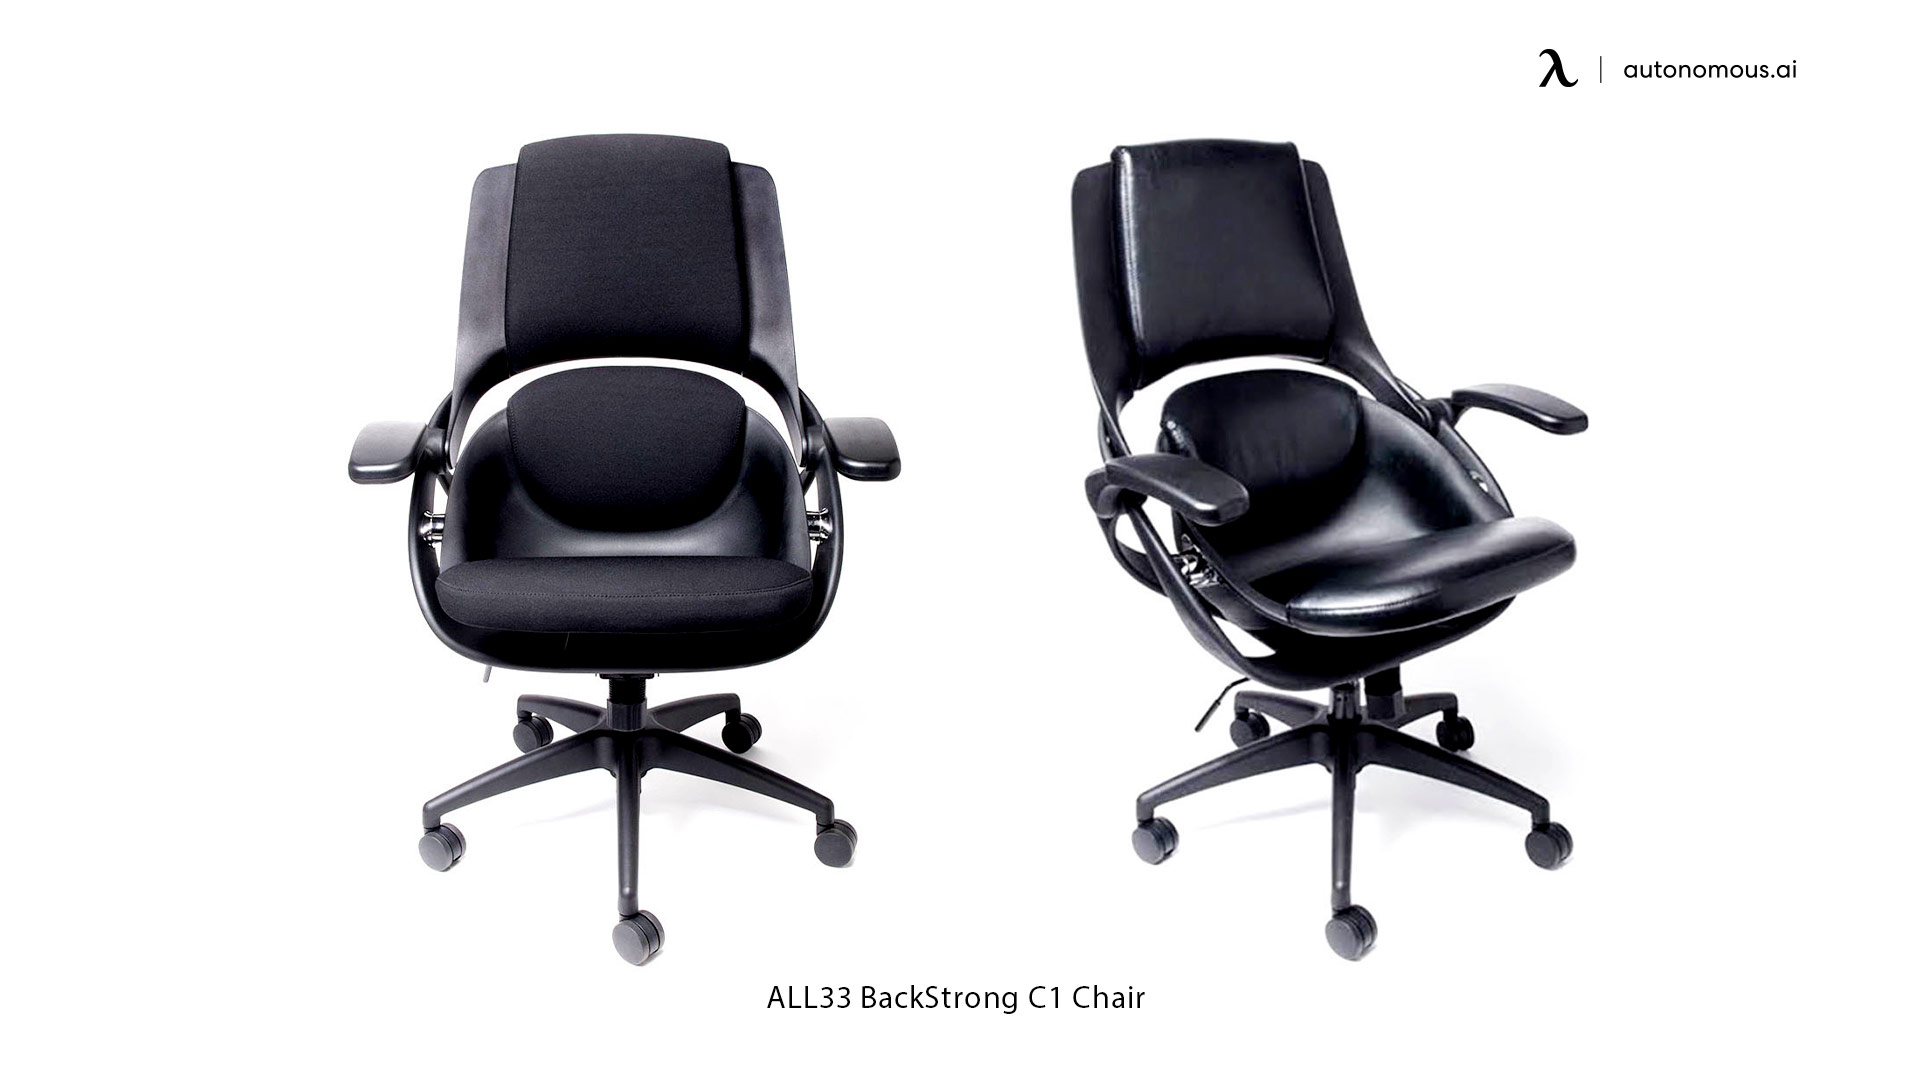 ALL33 BackStrong C1 Chair